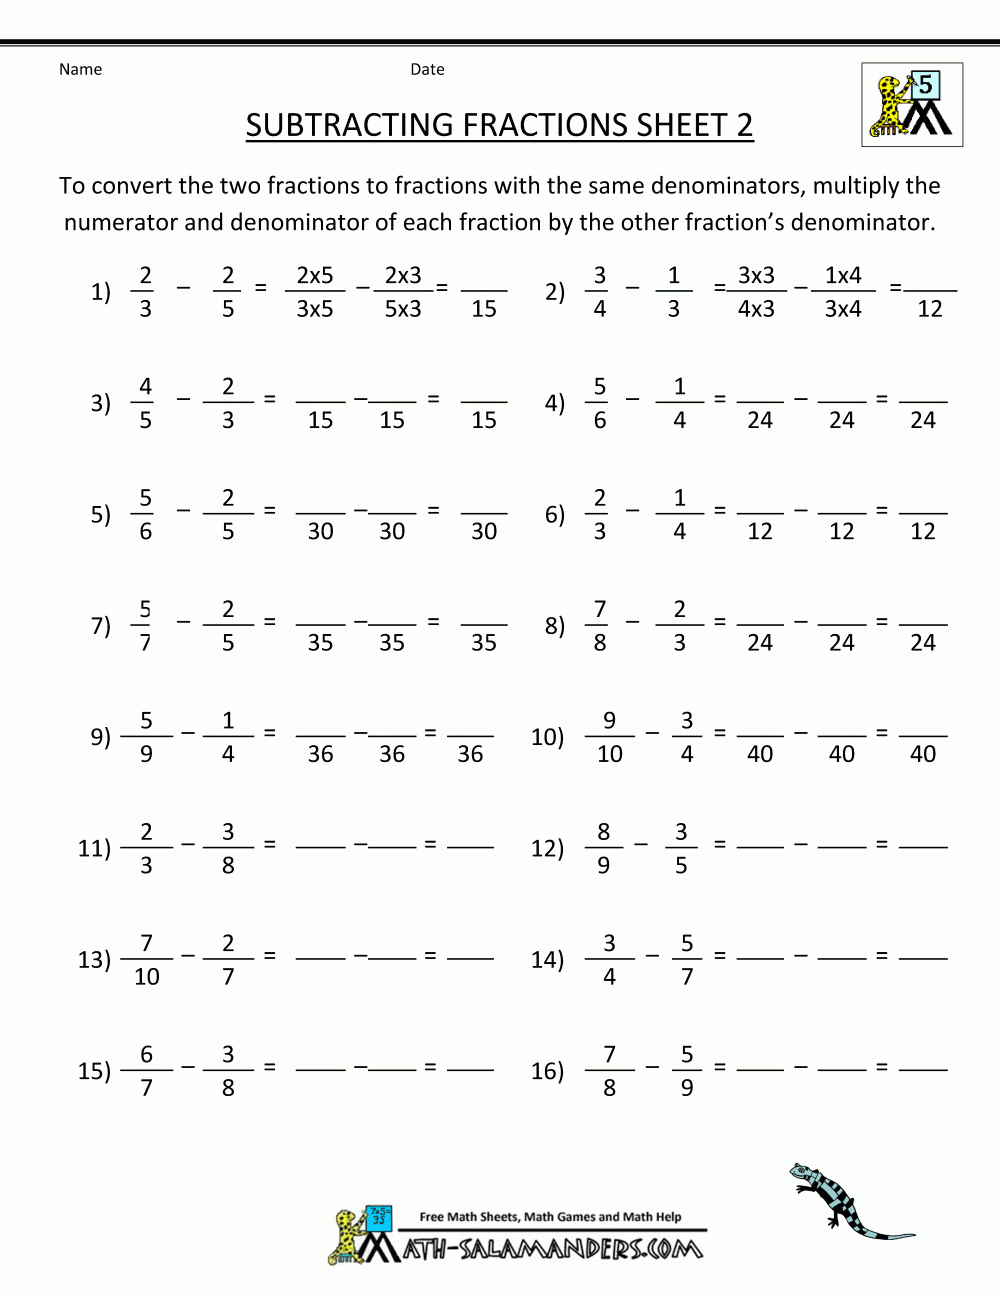 Free Printable Fraction Worksheets Subtracting Fractions 2 | Rekenen | Printable Fraction Worksheets